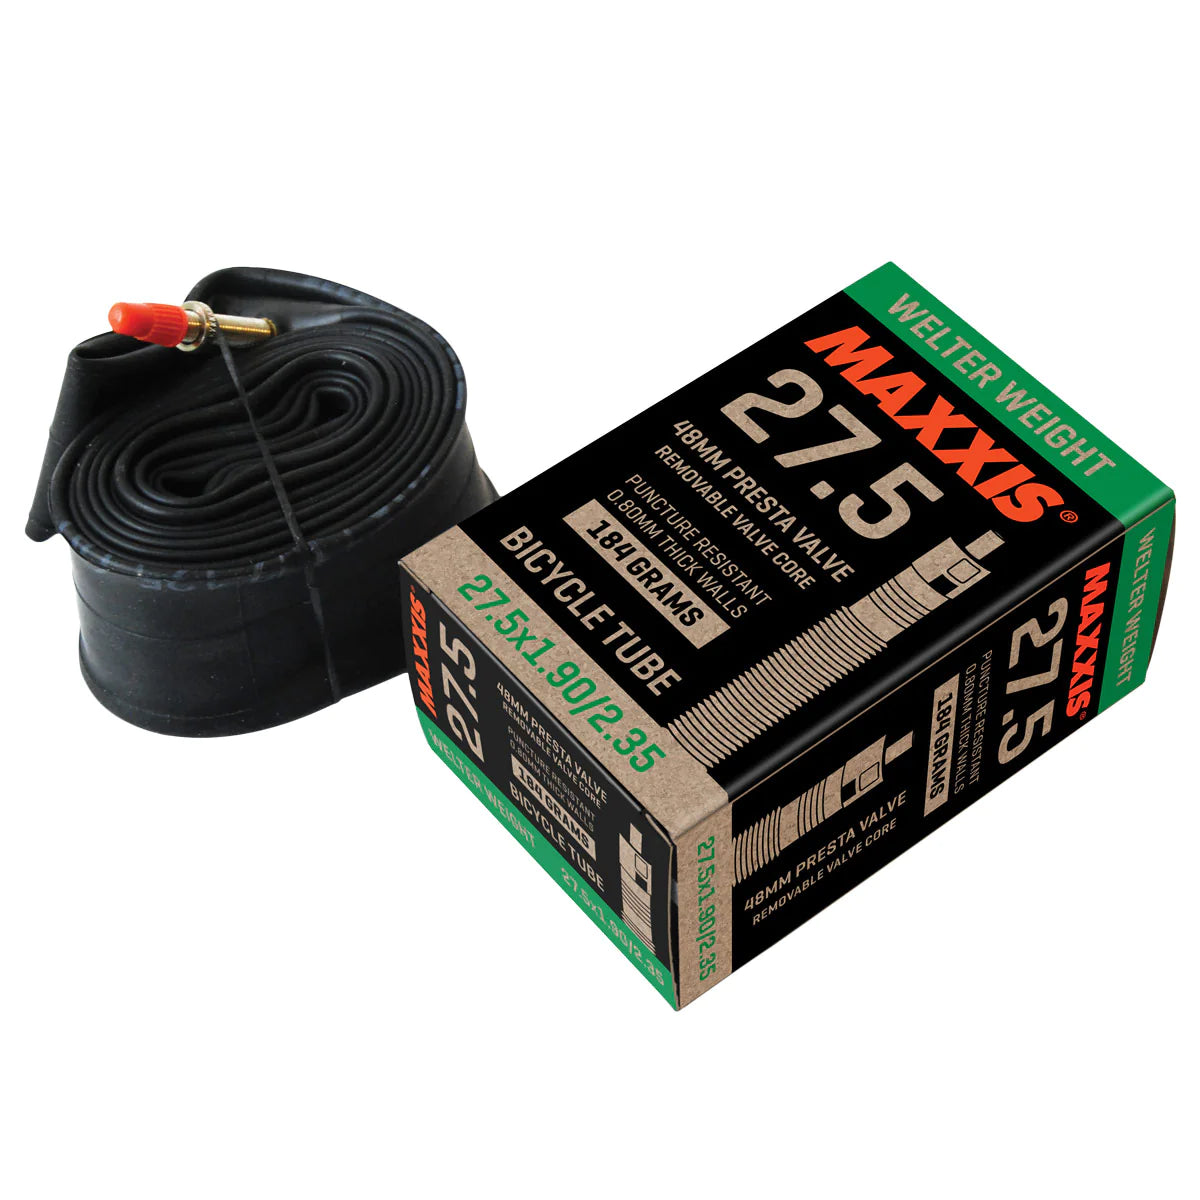 Maxxis Welter Weight Tube, Presta 48mm